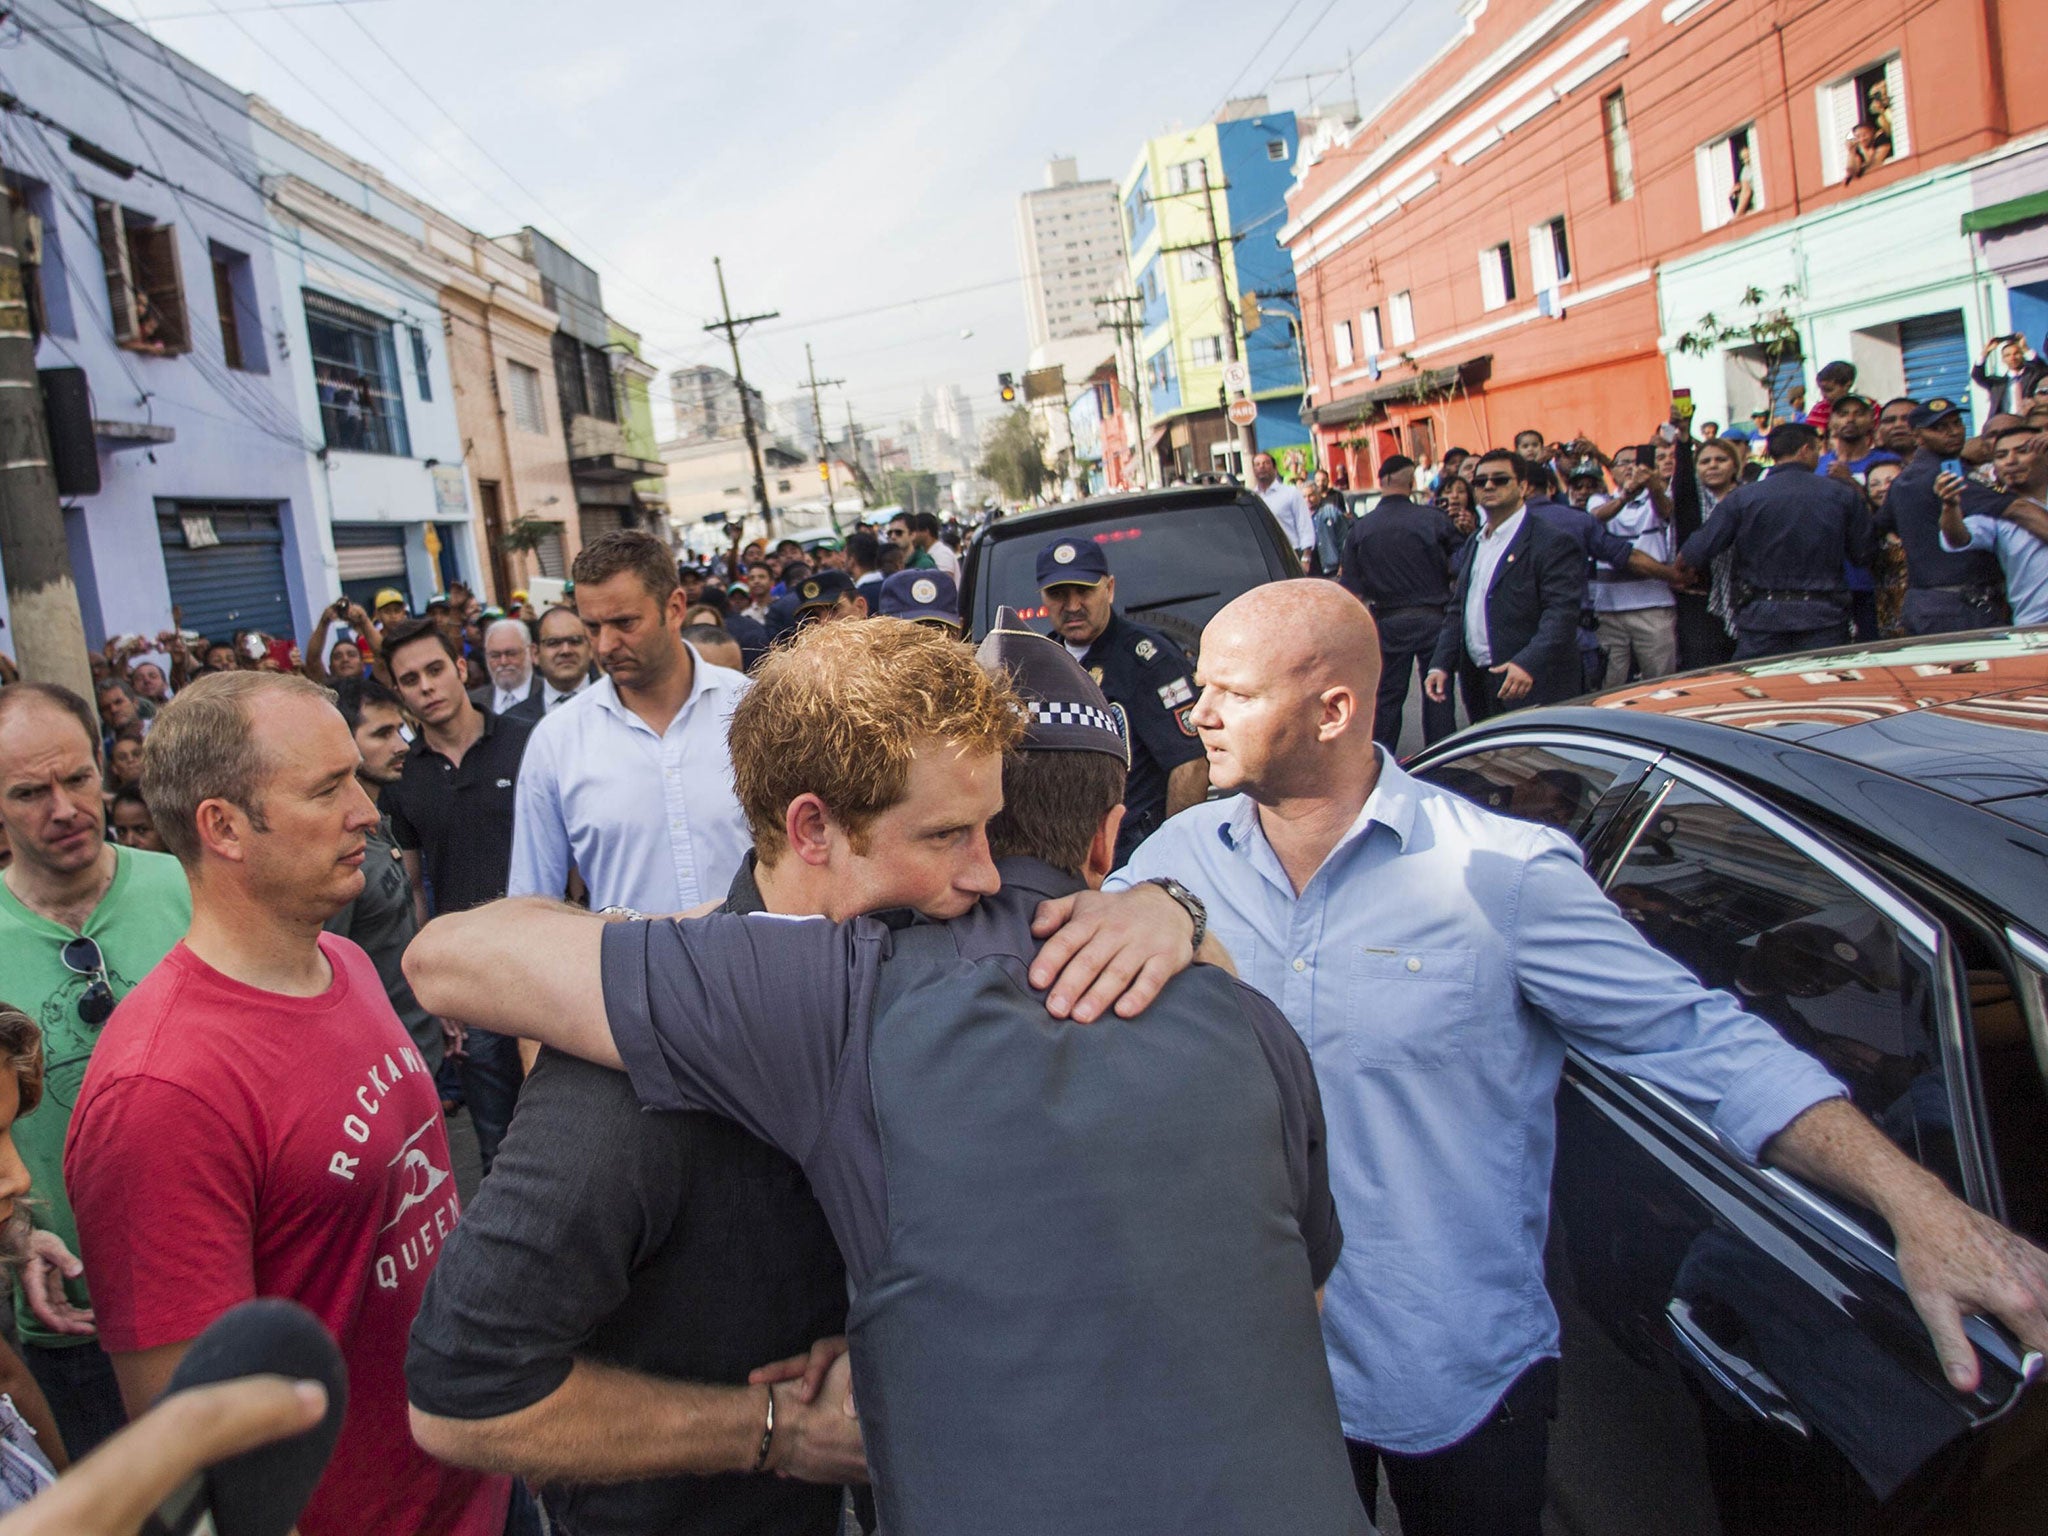 Prince Harry (C) embraces a resident during a visit to Sao Paulo's Luz neighborhood known to locals as Cracolandia (Crackland)